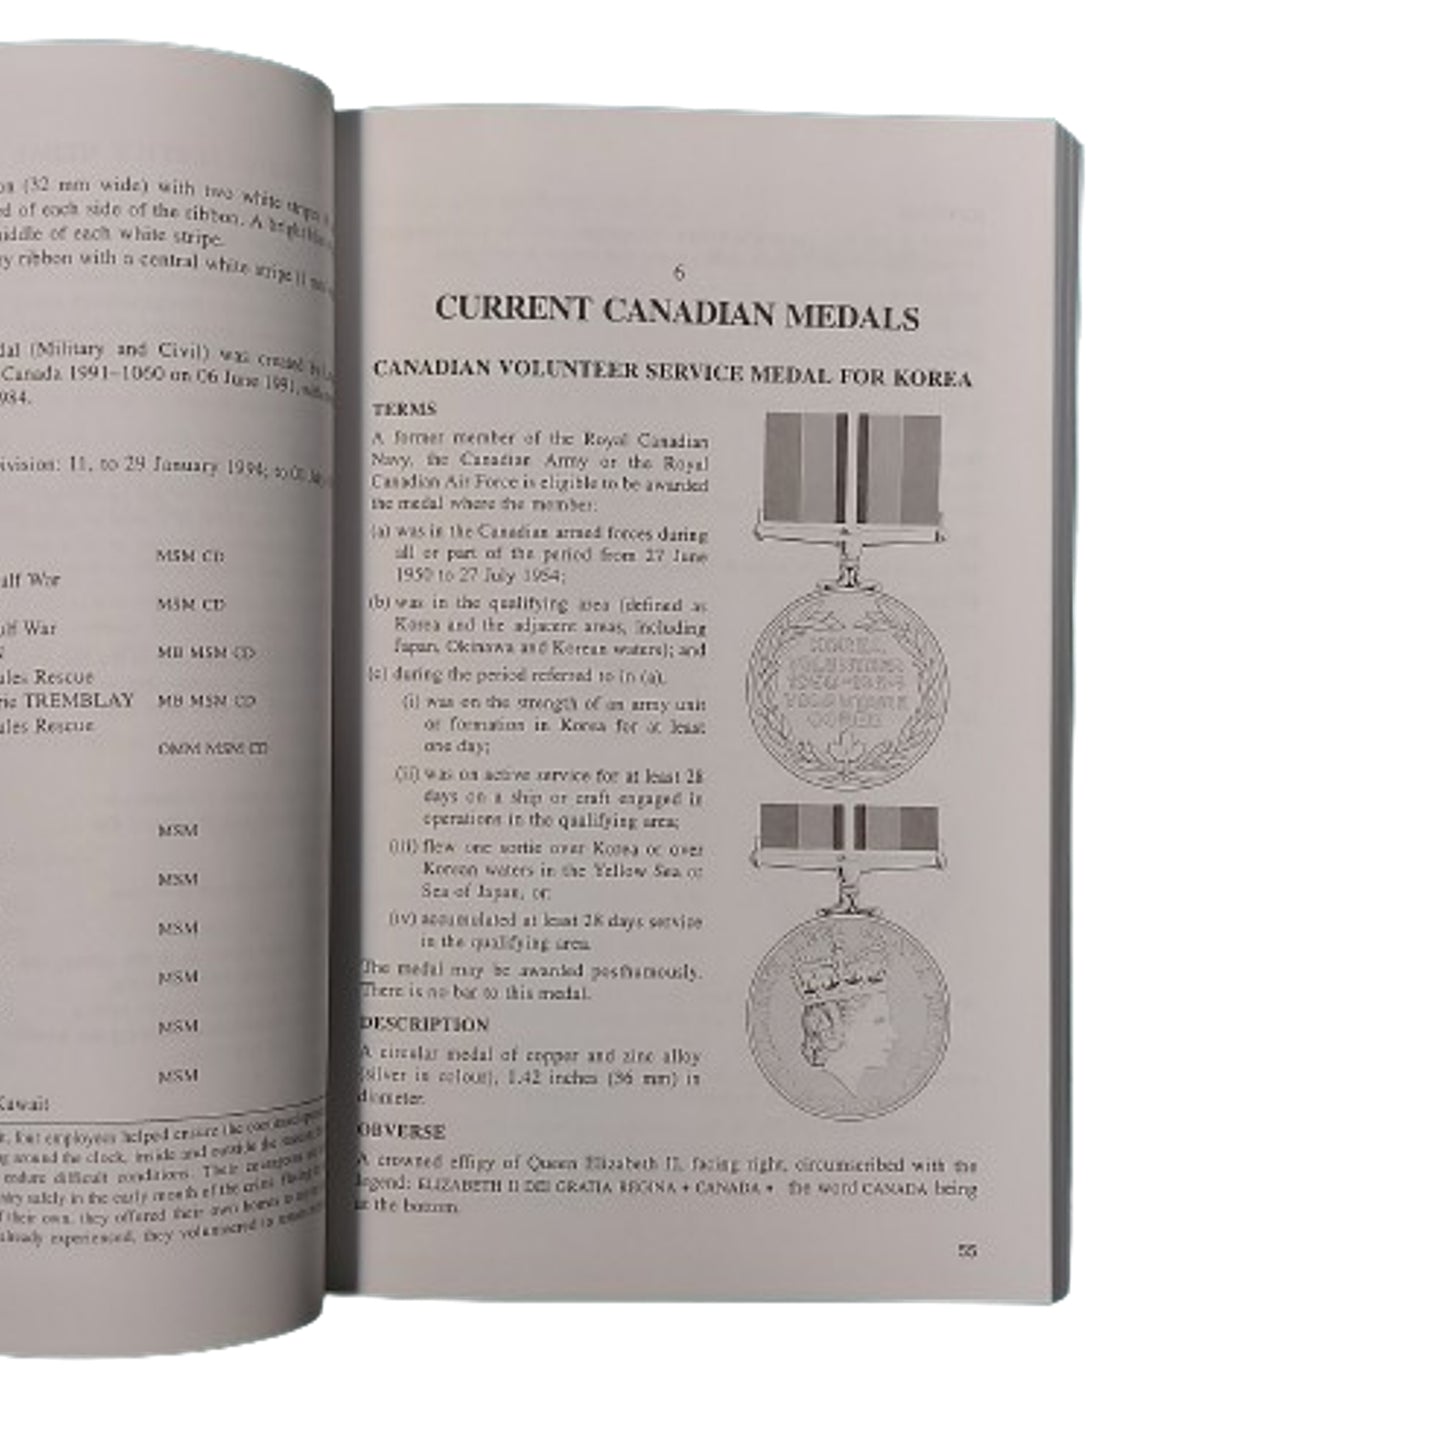 Canadian Orders, Decorations, And Medals